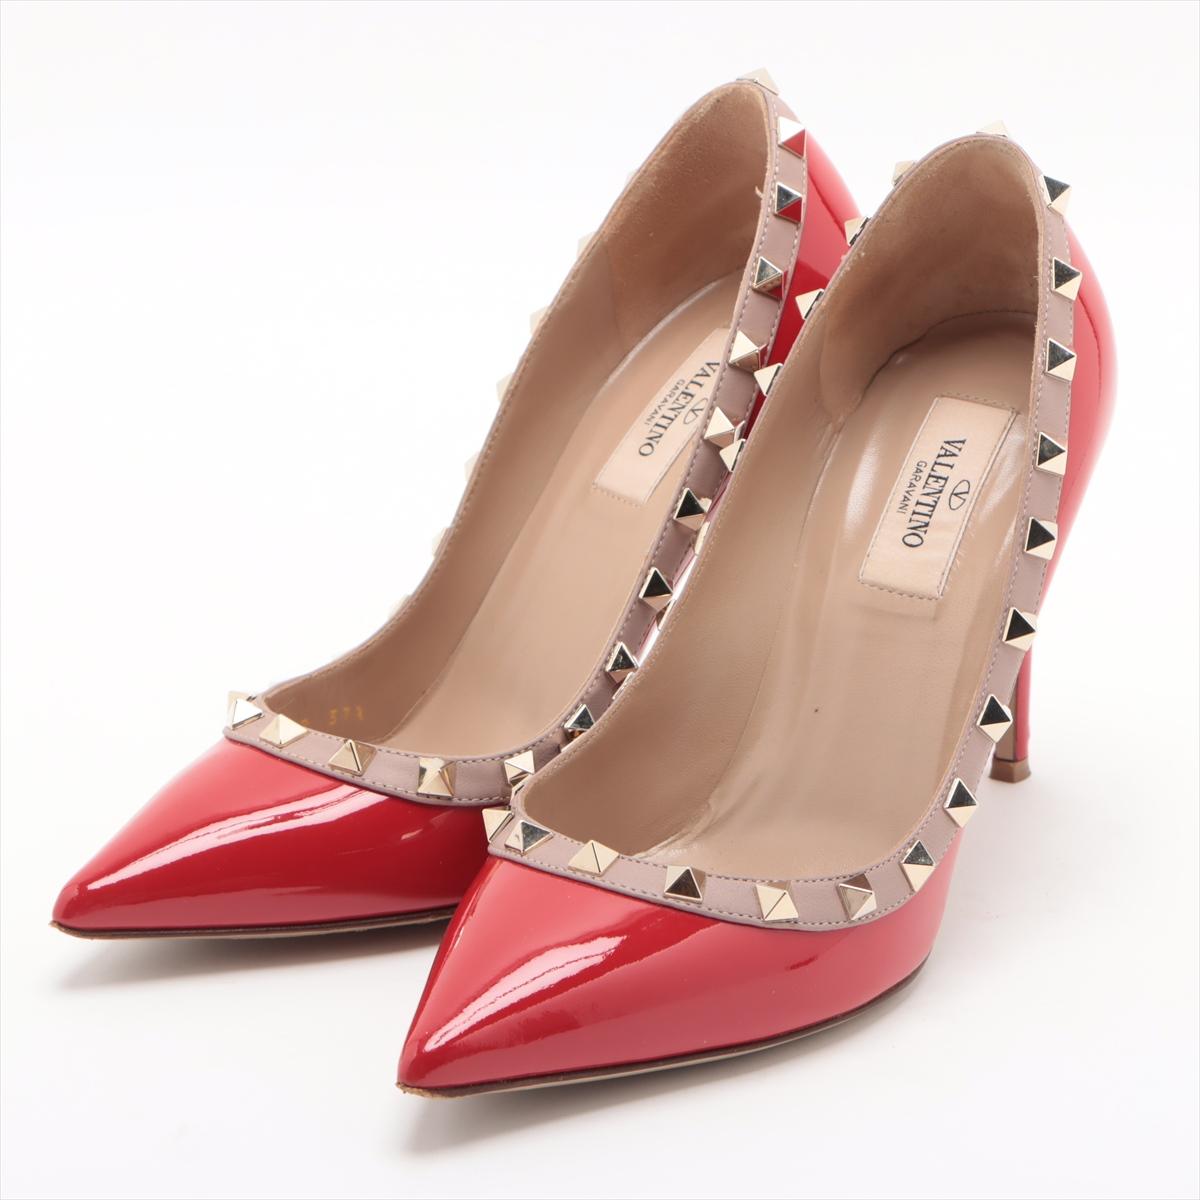 The Valentino Garavani Rockstud Pointed-toe Patent Leather Pump in Red is a striking and elegant footwear choice that exudes sophistication and glamour. Crafted from luxurious patent leather, the pumps feature a classic pointed-toe silhouette that